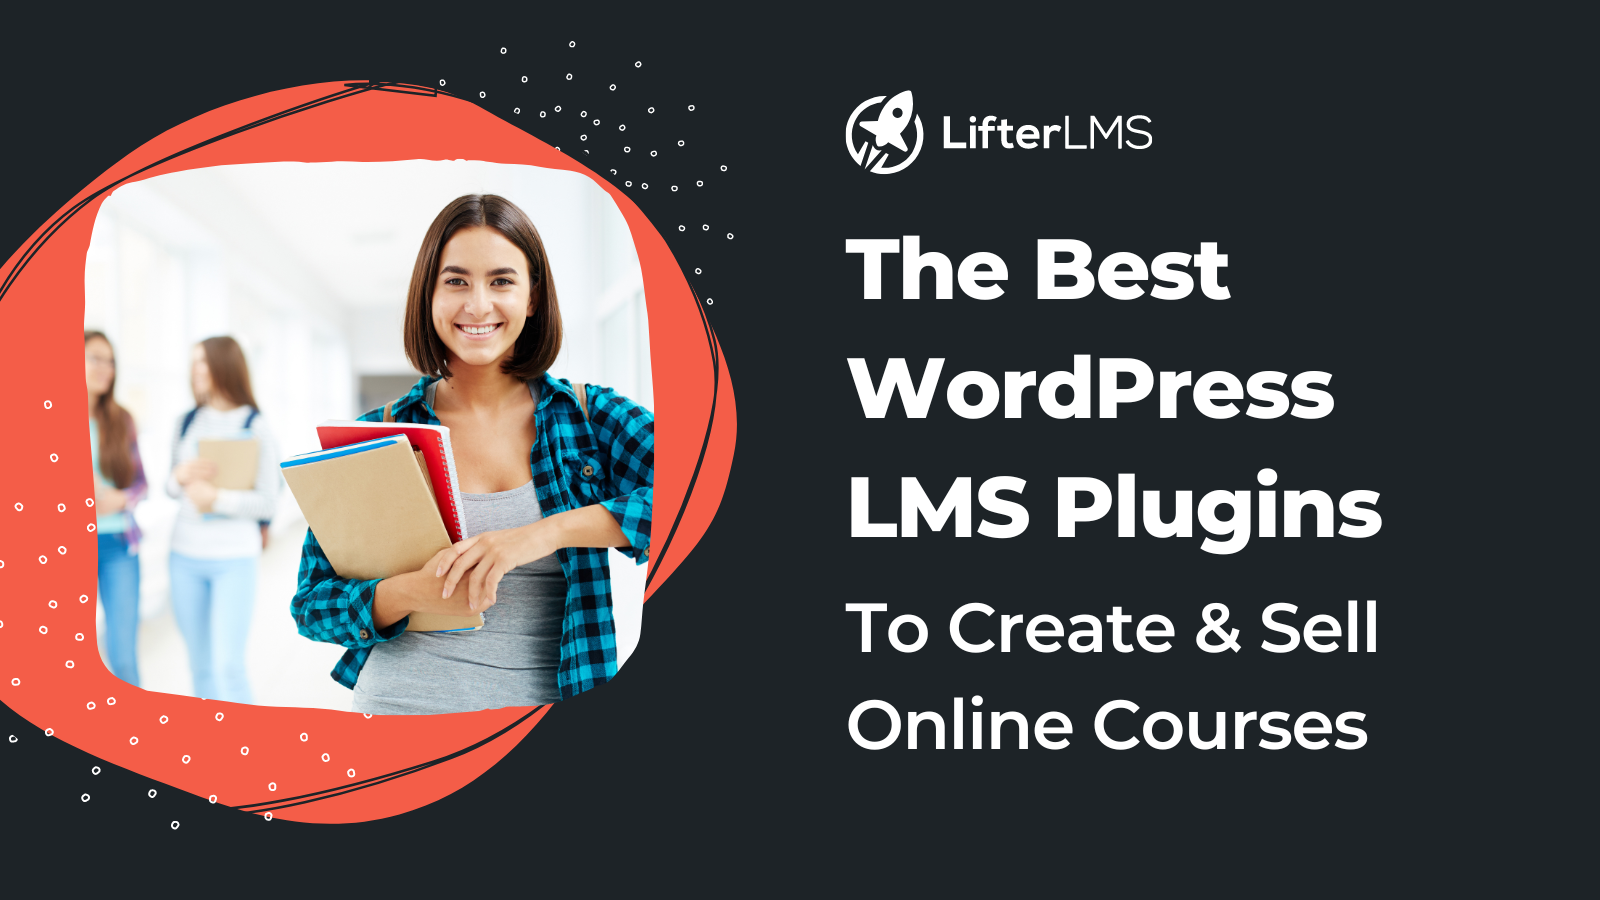 The Best WordPress LMS Plugins To Create & Sell Courses